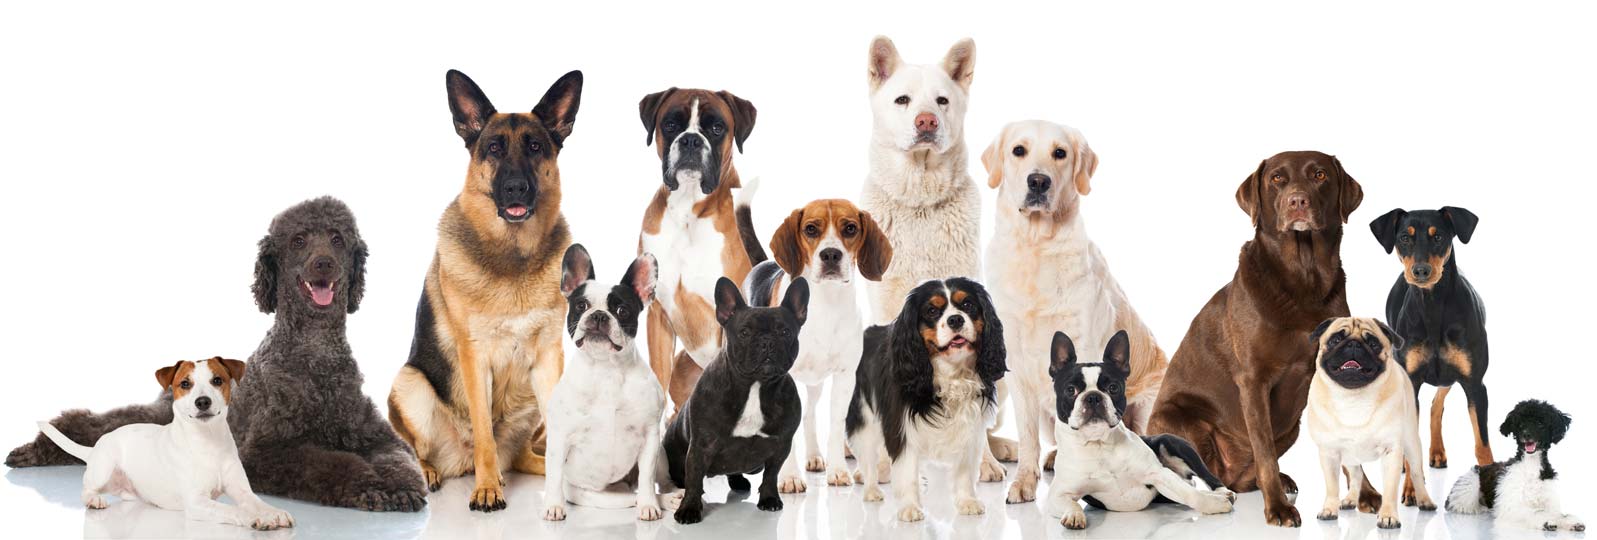 Why are there more variations in dog breeds than cat breeds?